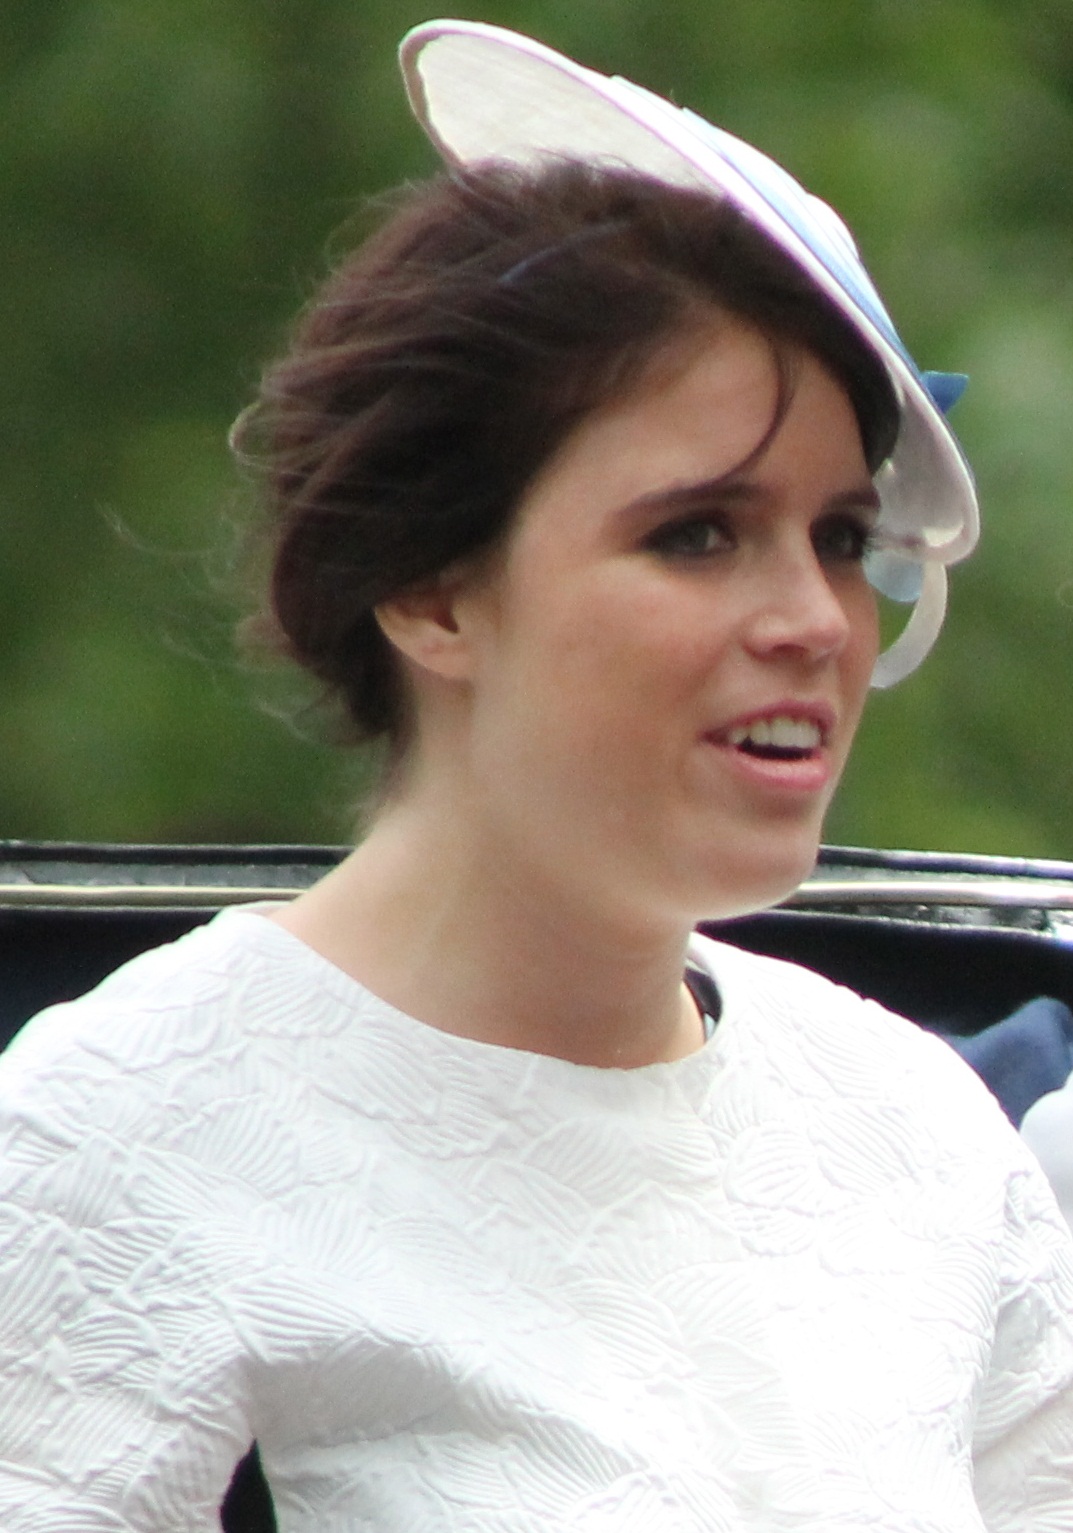 People News Roundup: Princess Eugenie names baby son August; Tiger Woods hospitalized with multiple injuries after car accident and more